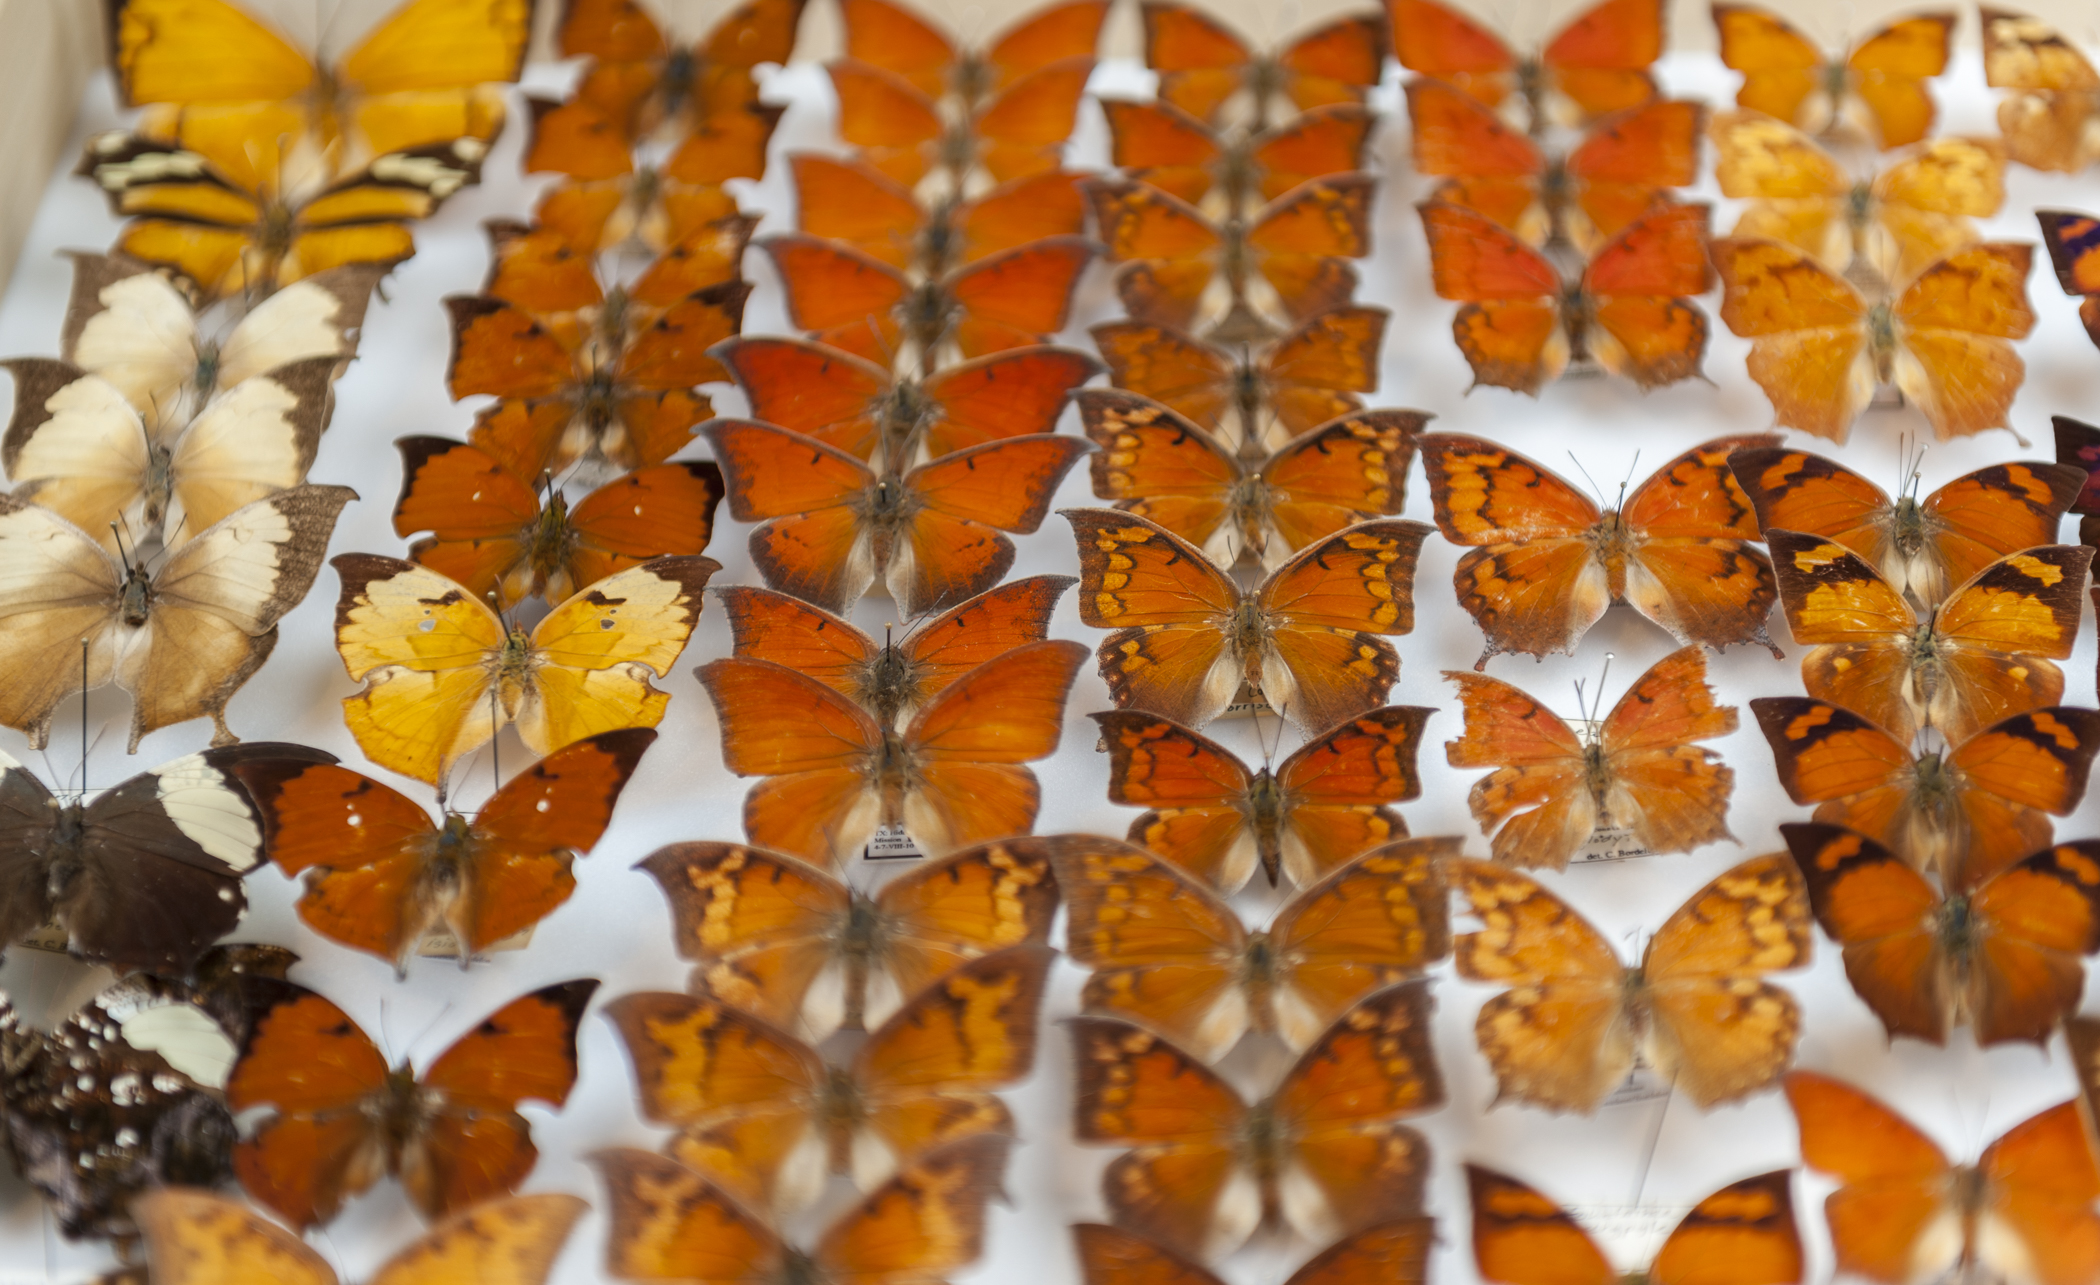 40 years of friendship, 70,000 specimens Amateur entomologists donate lifetimes worth of butterflies and moths photo